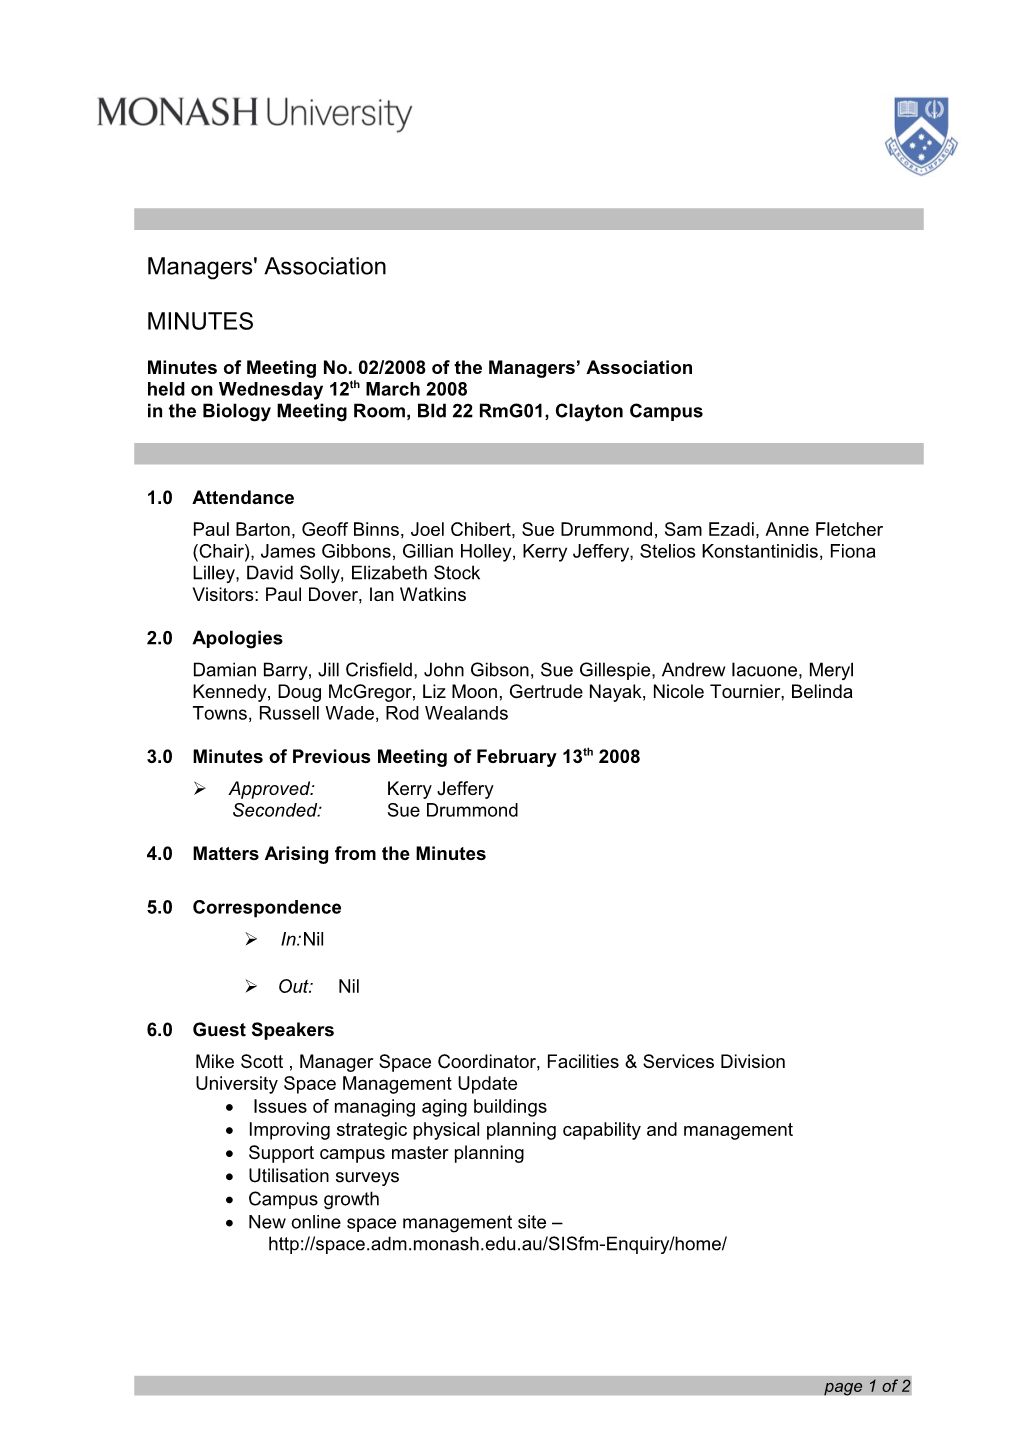 Minutes of Meeting No. 02/2008 of the Managers Association